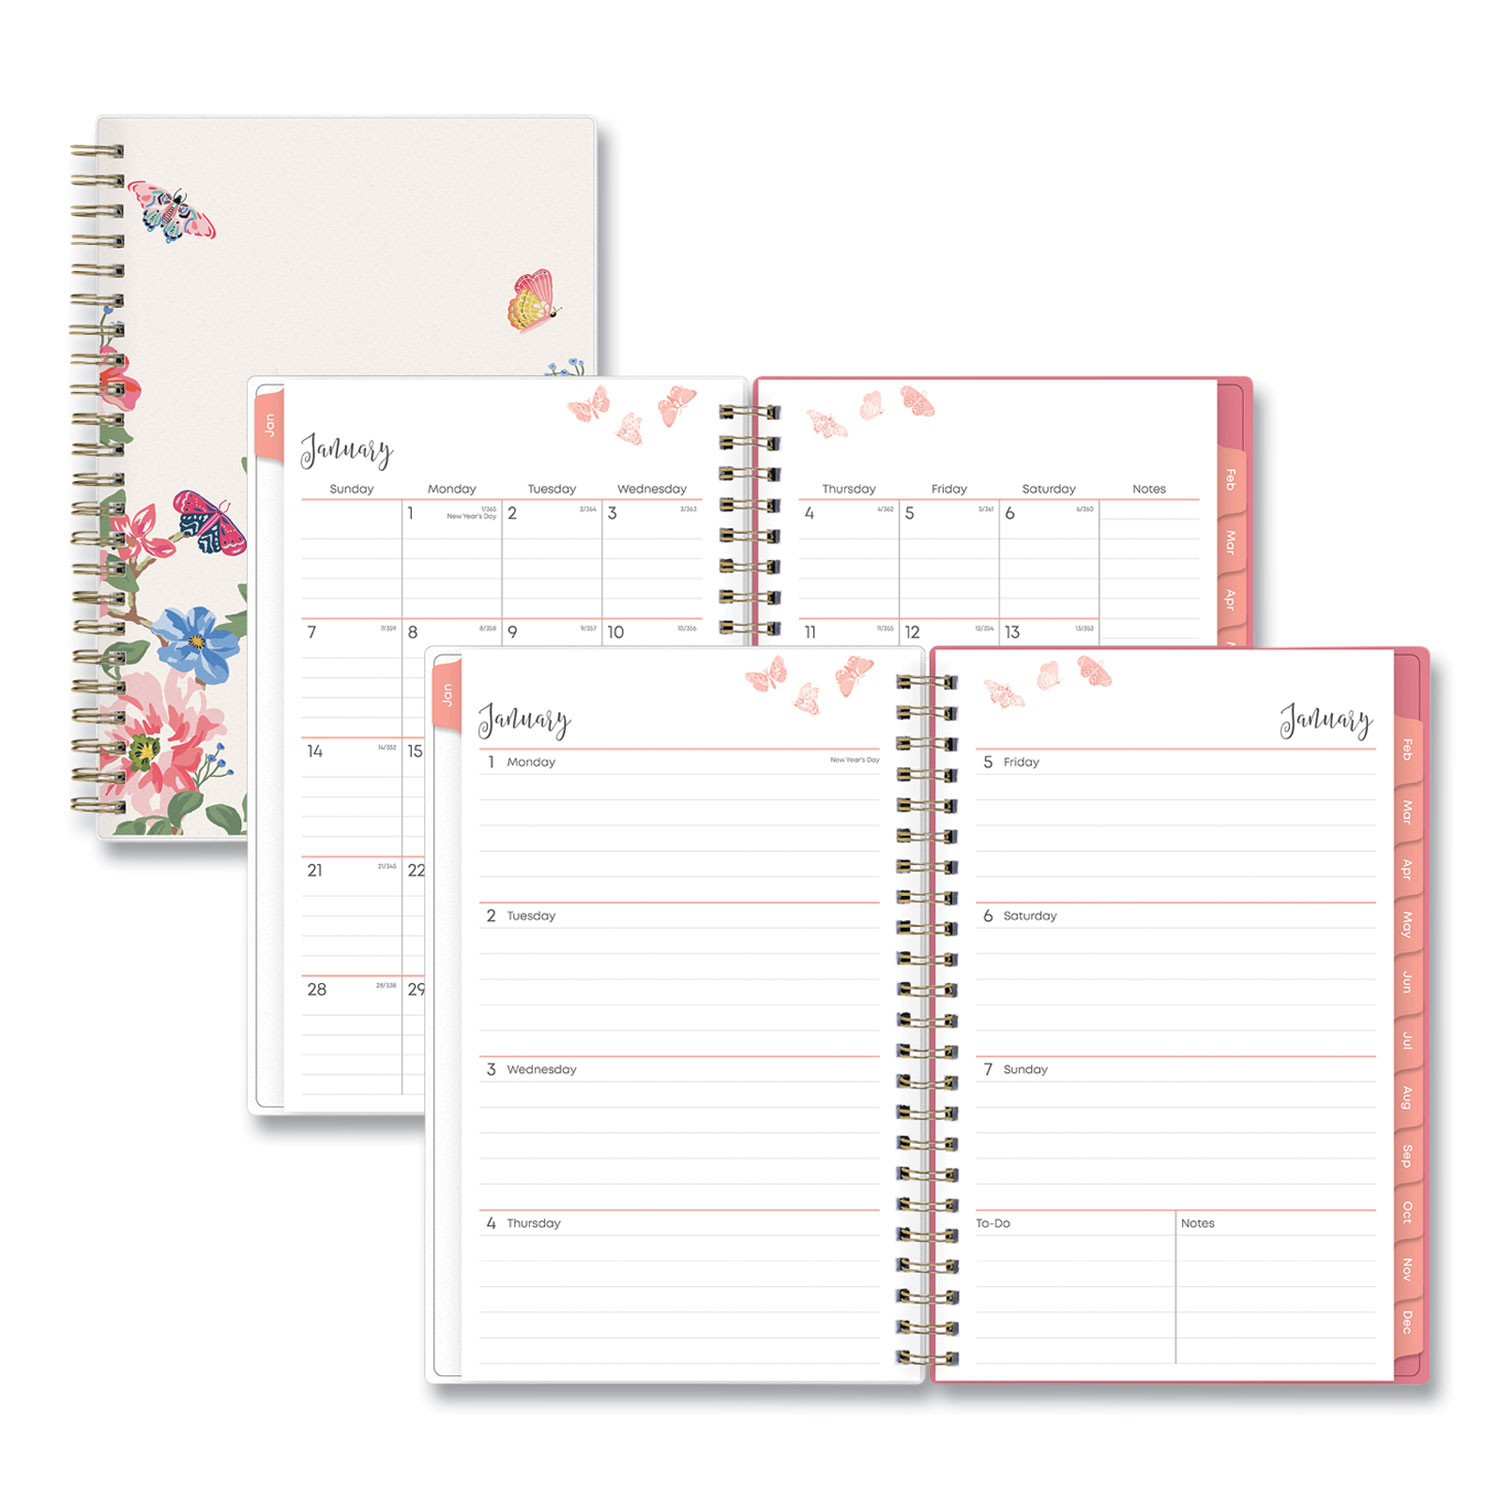 Daily & Weekly Undated Planner, Kit with Fineliner Colored Pens, Ruler and  Sticker Sheets, Calendar, Goals and To Do List, Dotted Pages